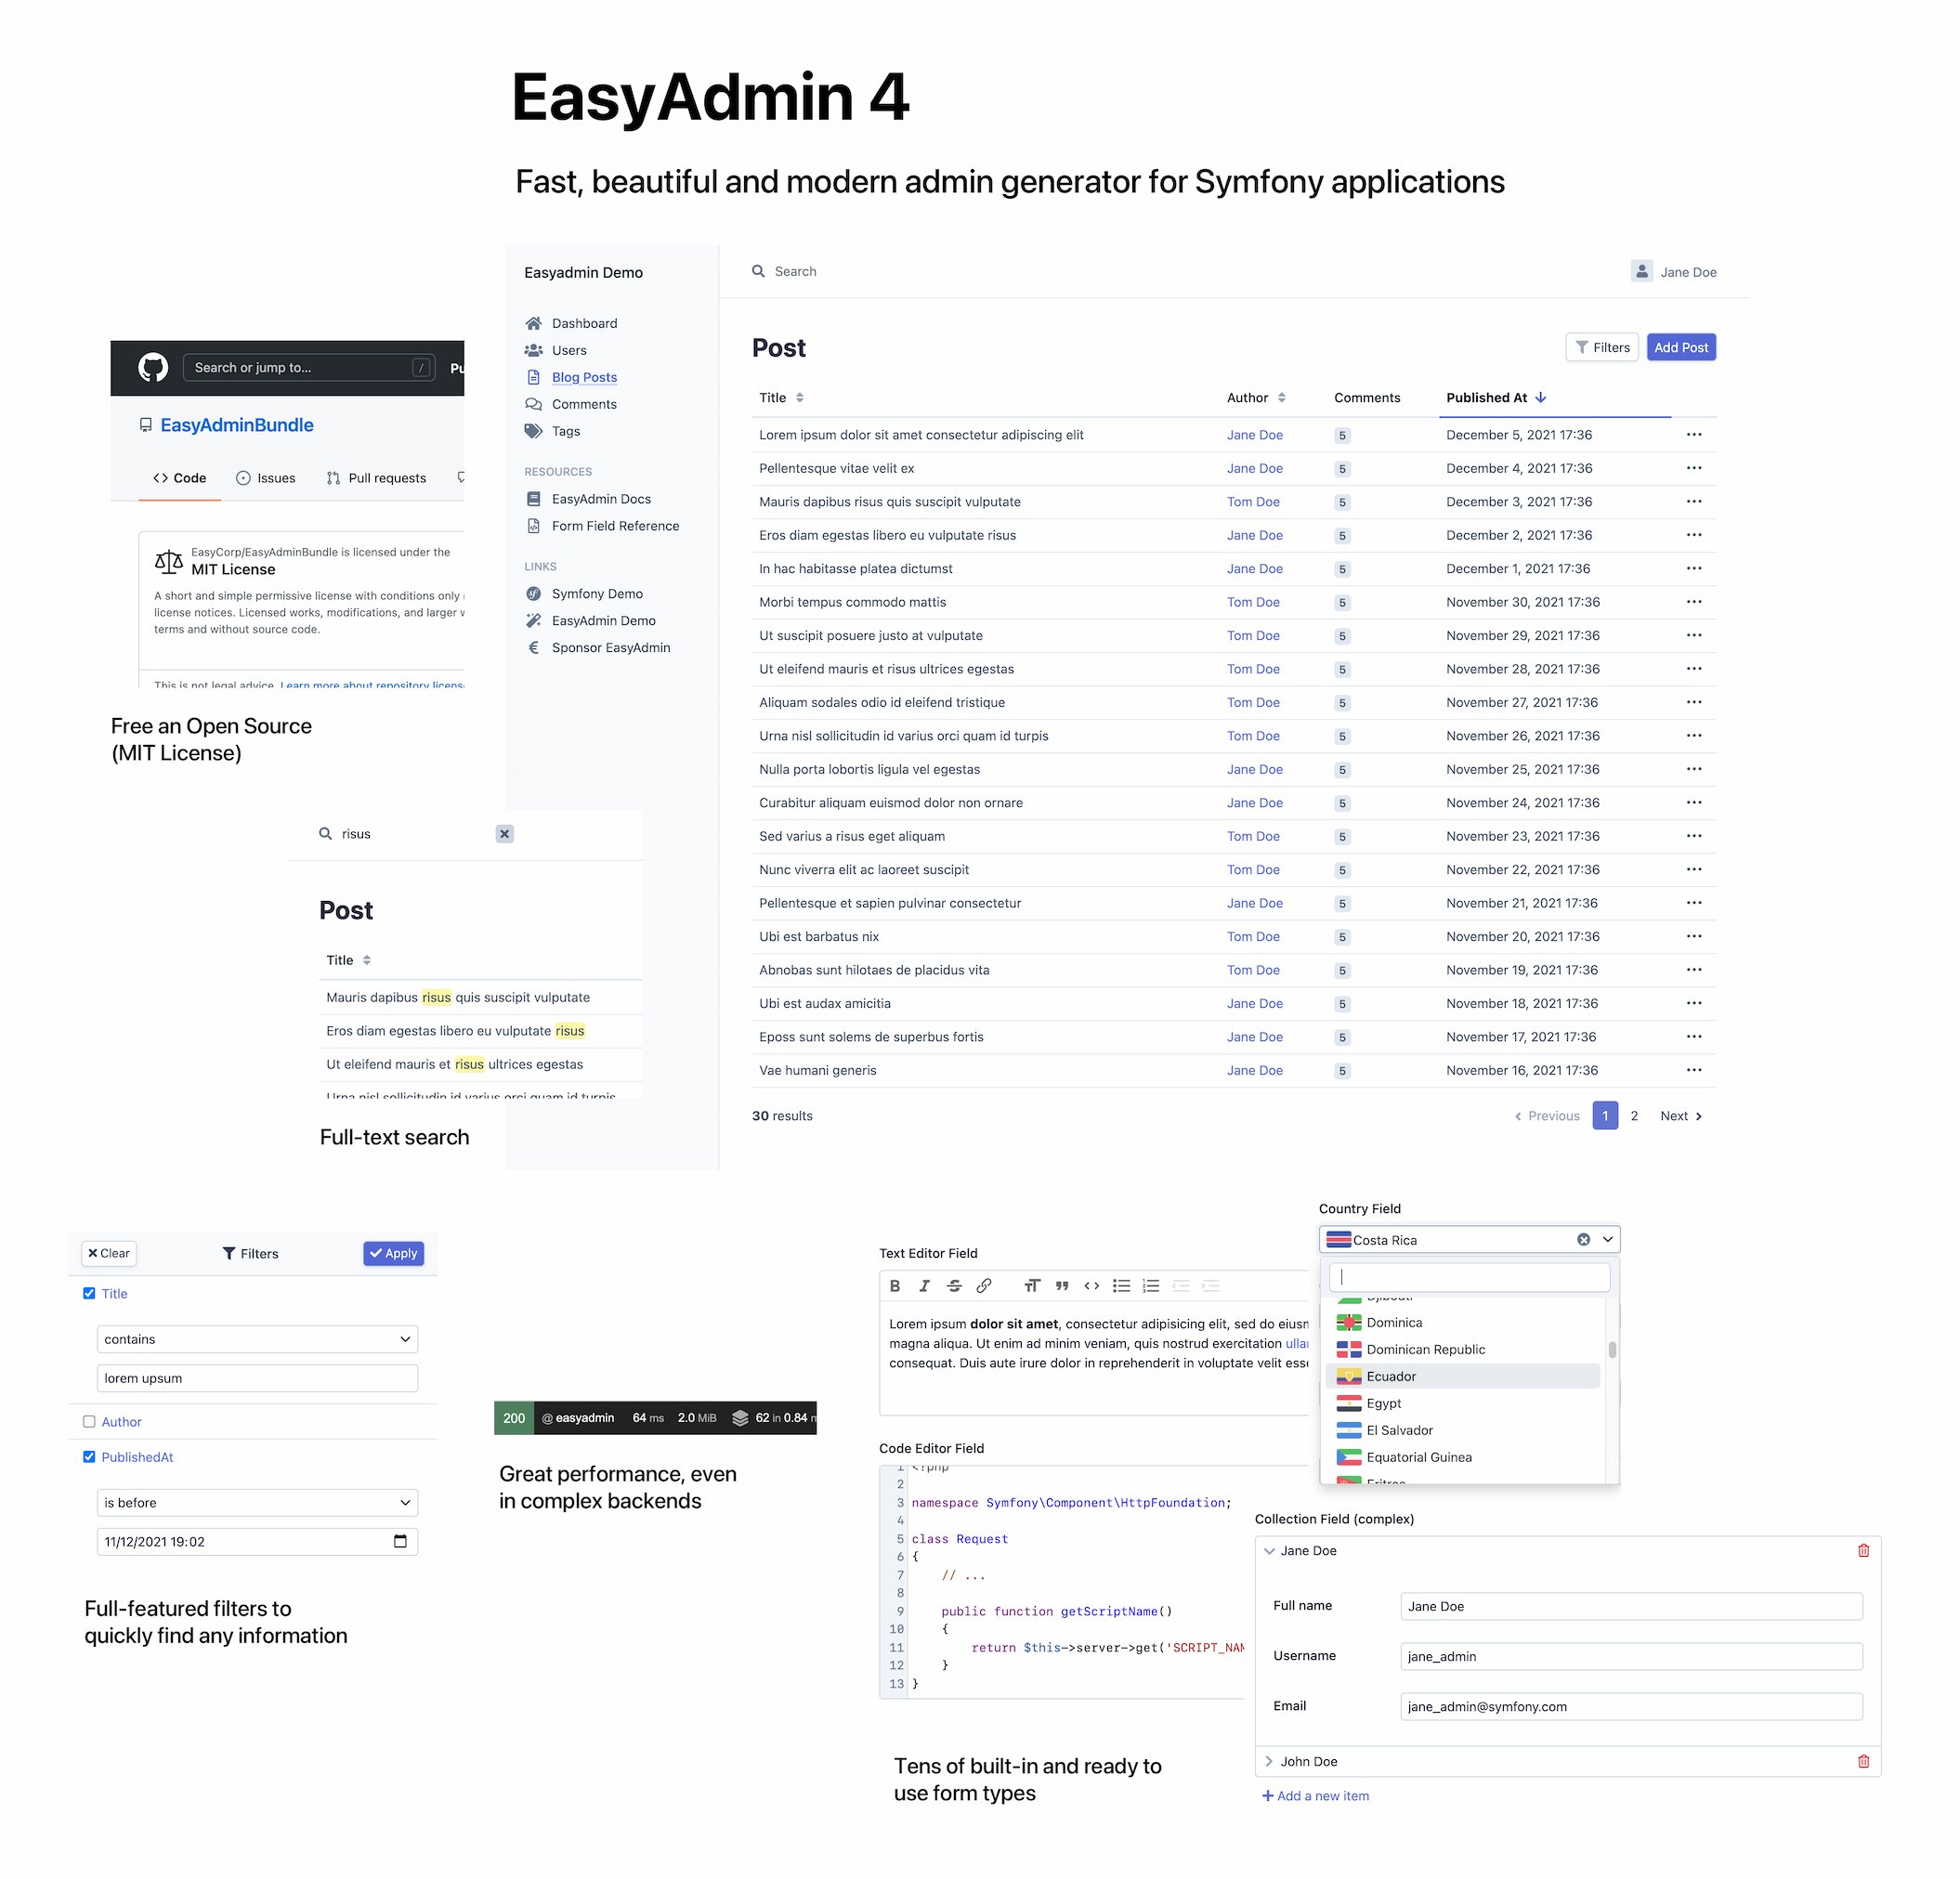 EasyAdmin, a fast, beautiful and modern admin generator for Symfony applications